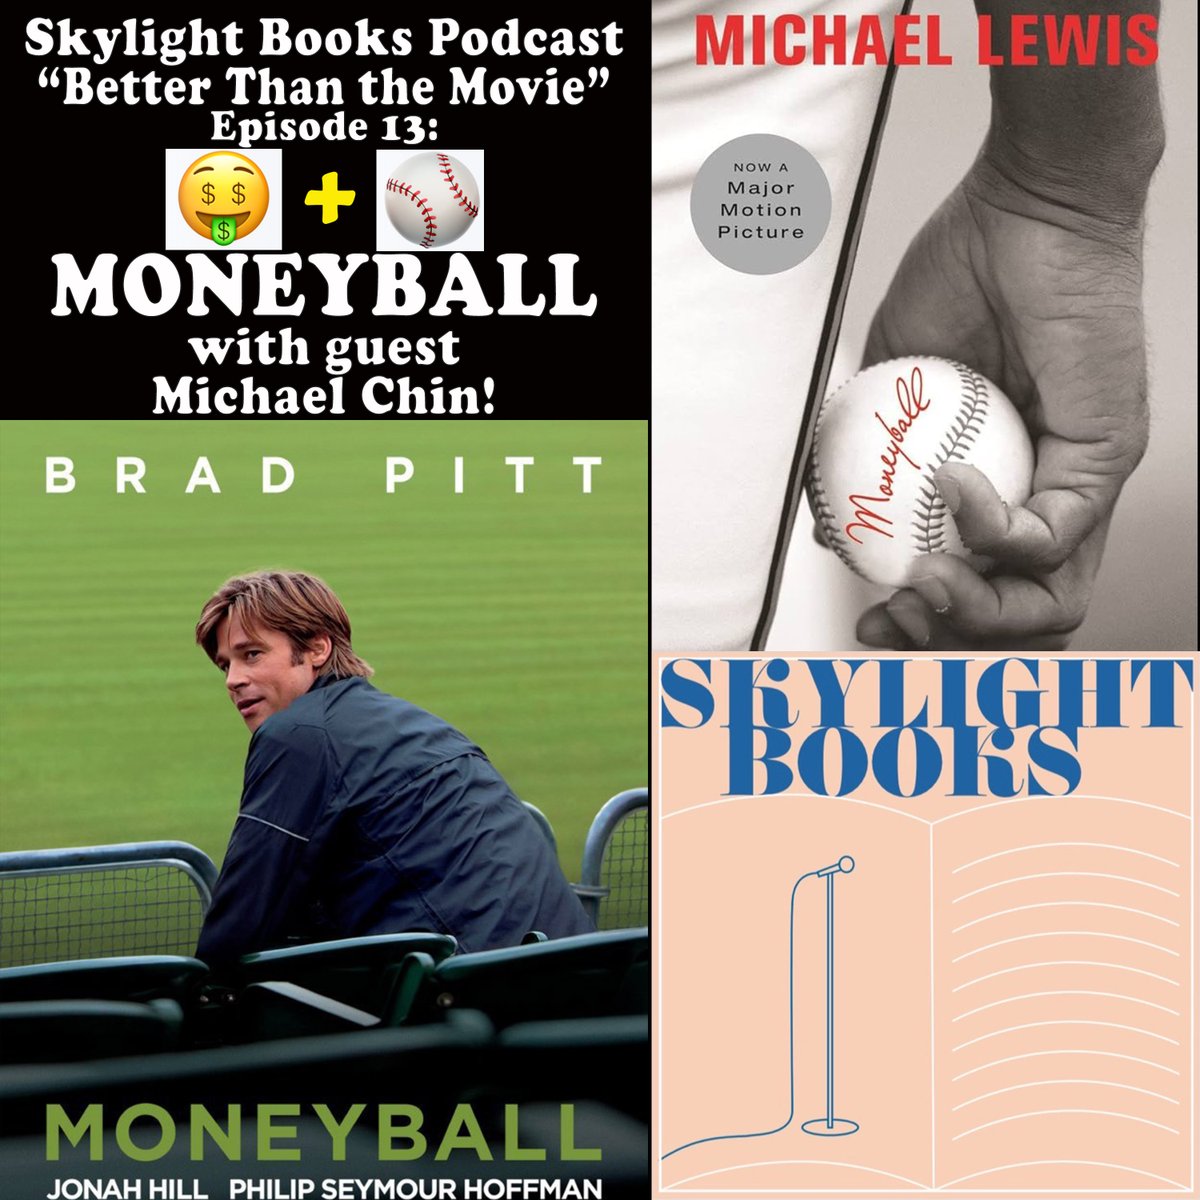 Happy Opening Day, baseball fans! The podcast is back with another Better Than the Movie episode. @TyLAustin picked MONEYBALL, and guest Michael Chin is ready to check box scores! Apple - apple.co/3PFJ5T5 Spotify - spoti.fi/3RZUBdV ...or via your fave podcast app!